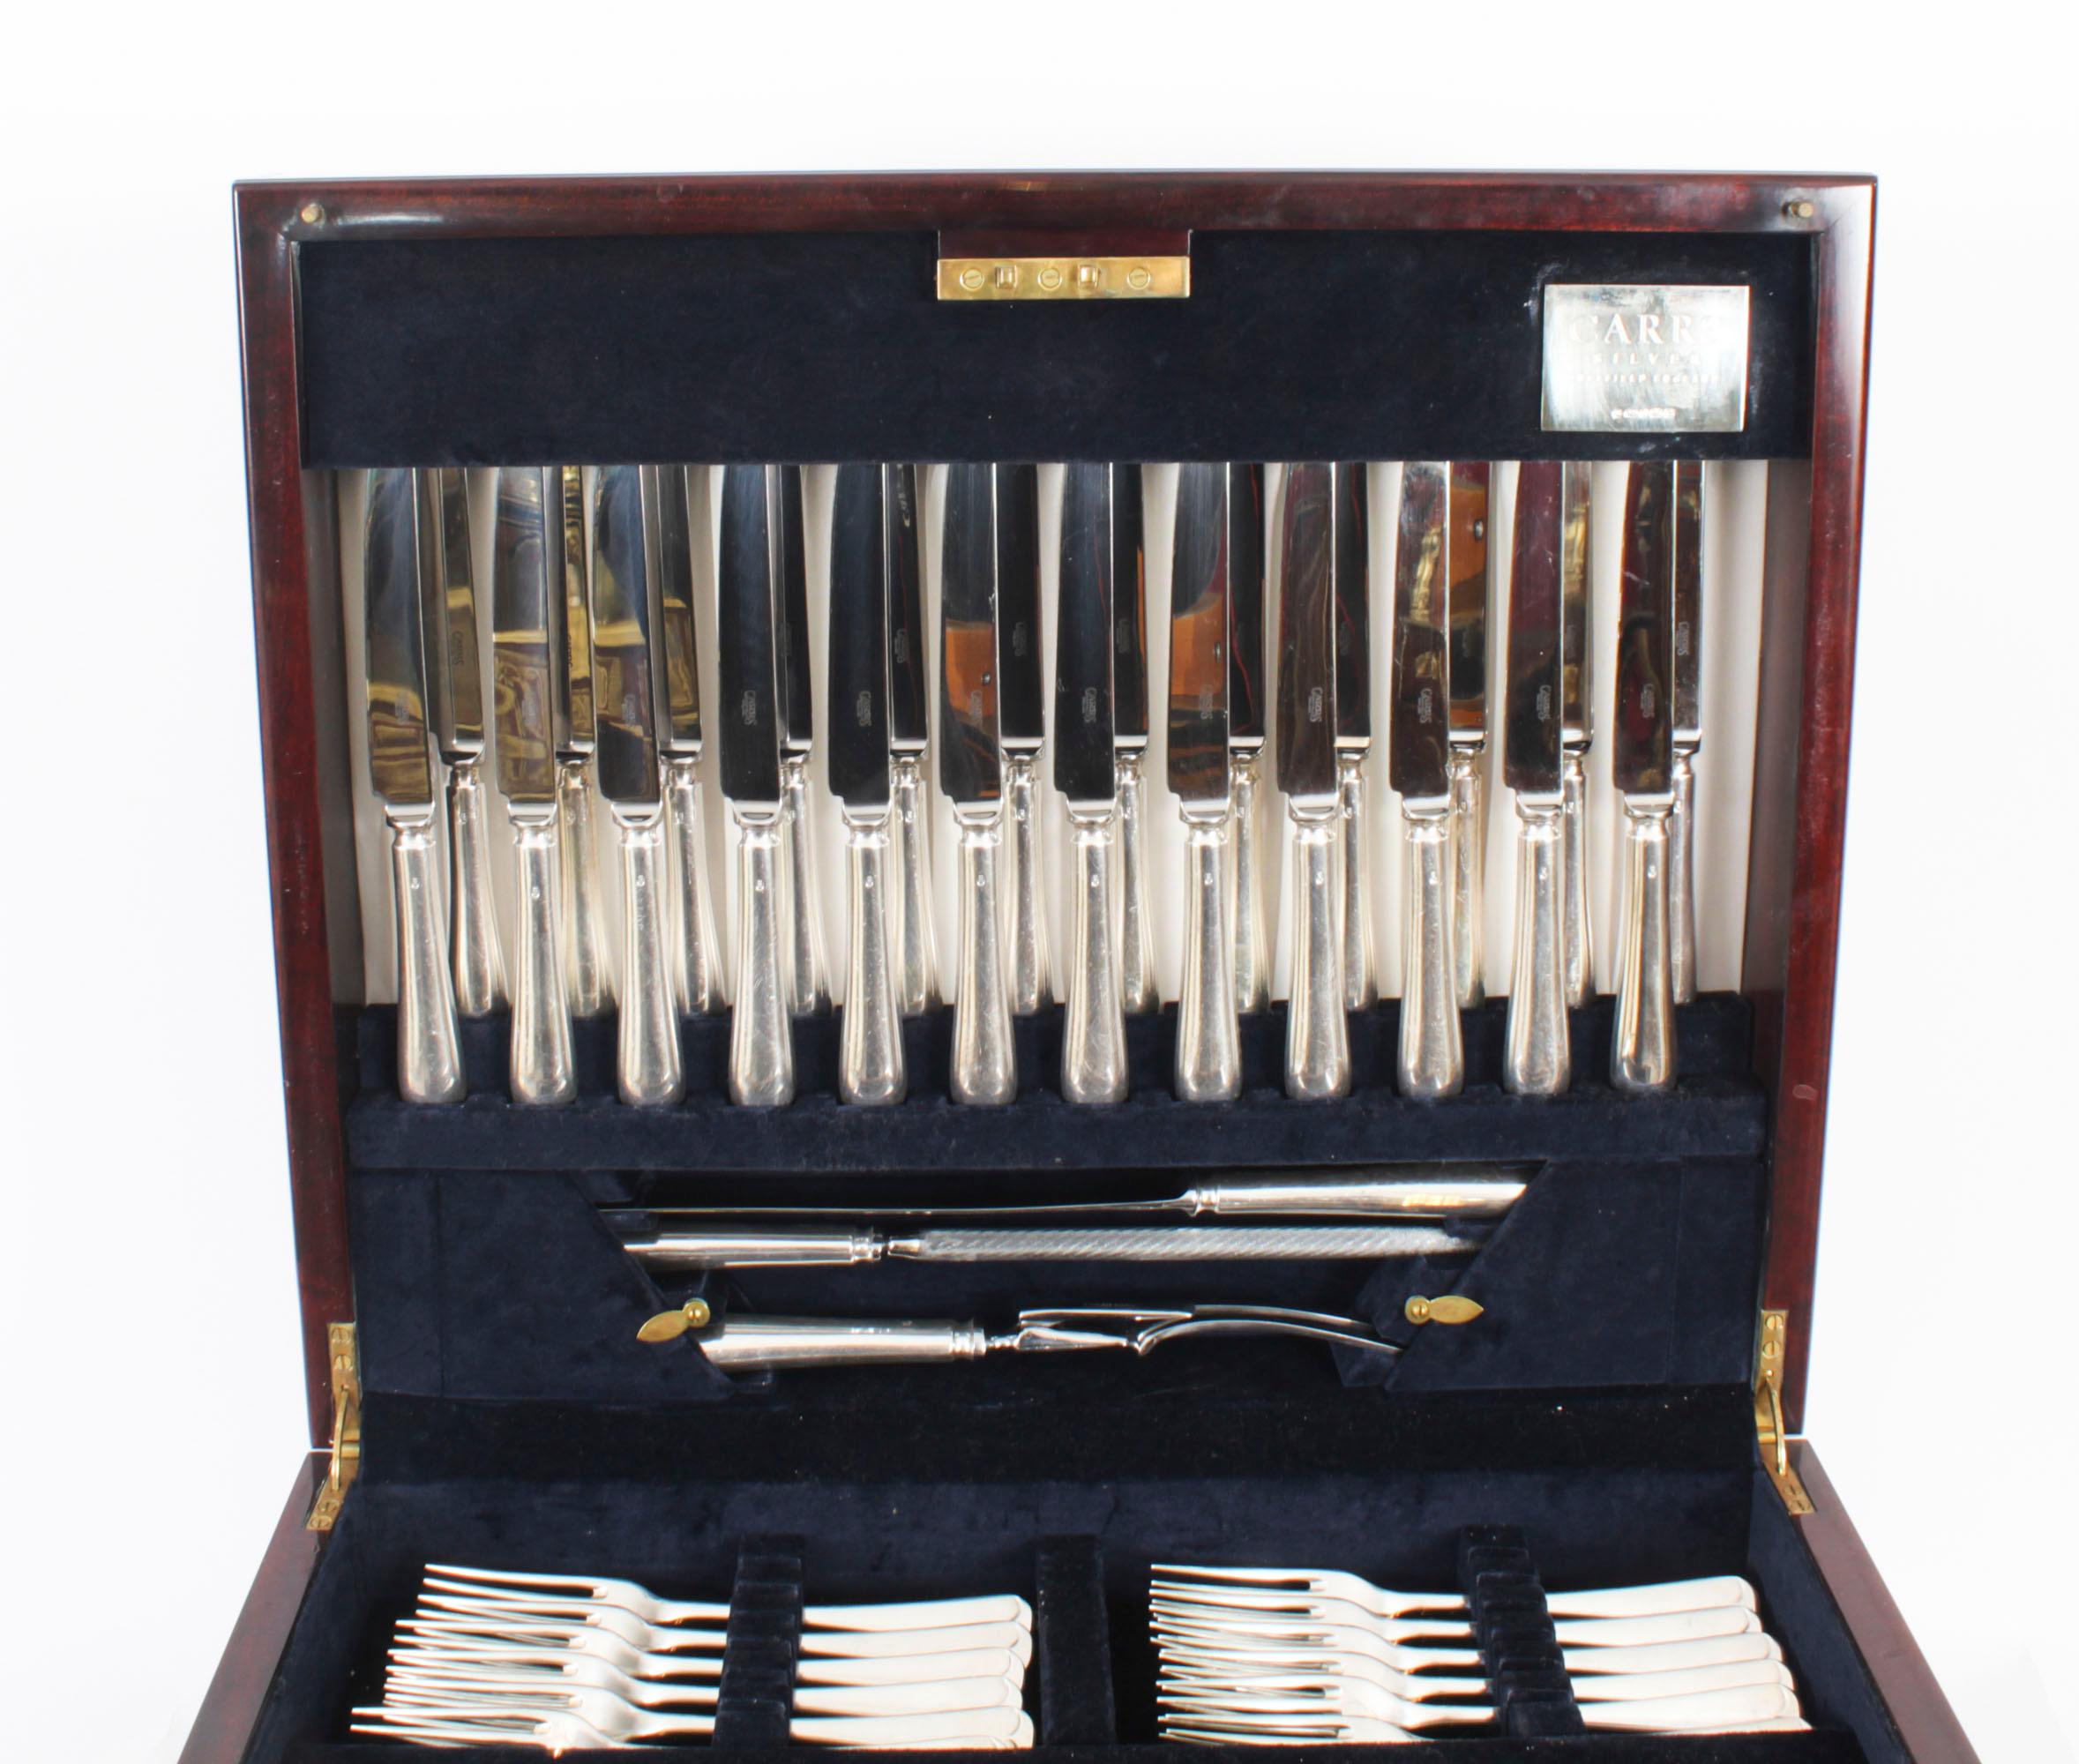 Vintage150 Piece Canteen-12 Place Sterling Silver Cutlery Set by Carrs 2004 For Sale 1